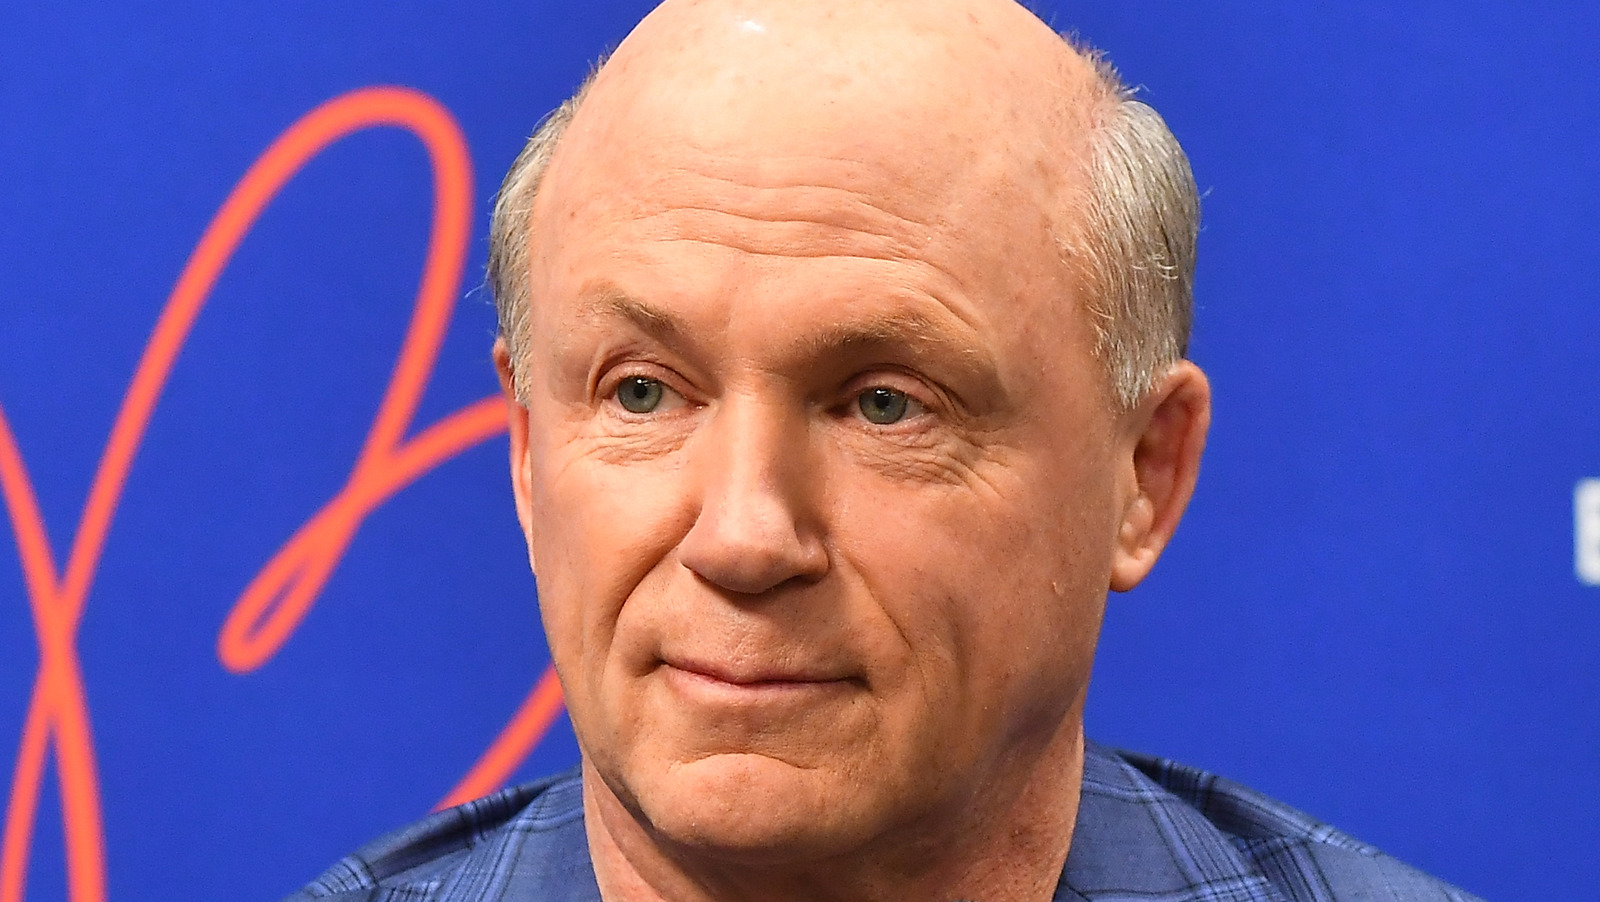 ChickFilA's CEO Dan Cathy Is Resigning. Here's Who Will Take Over